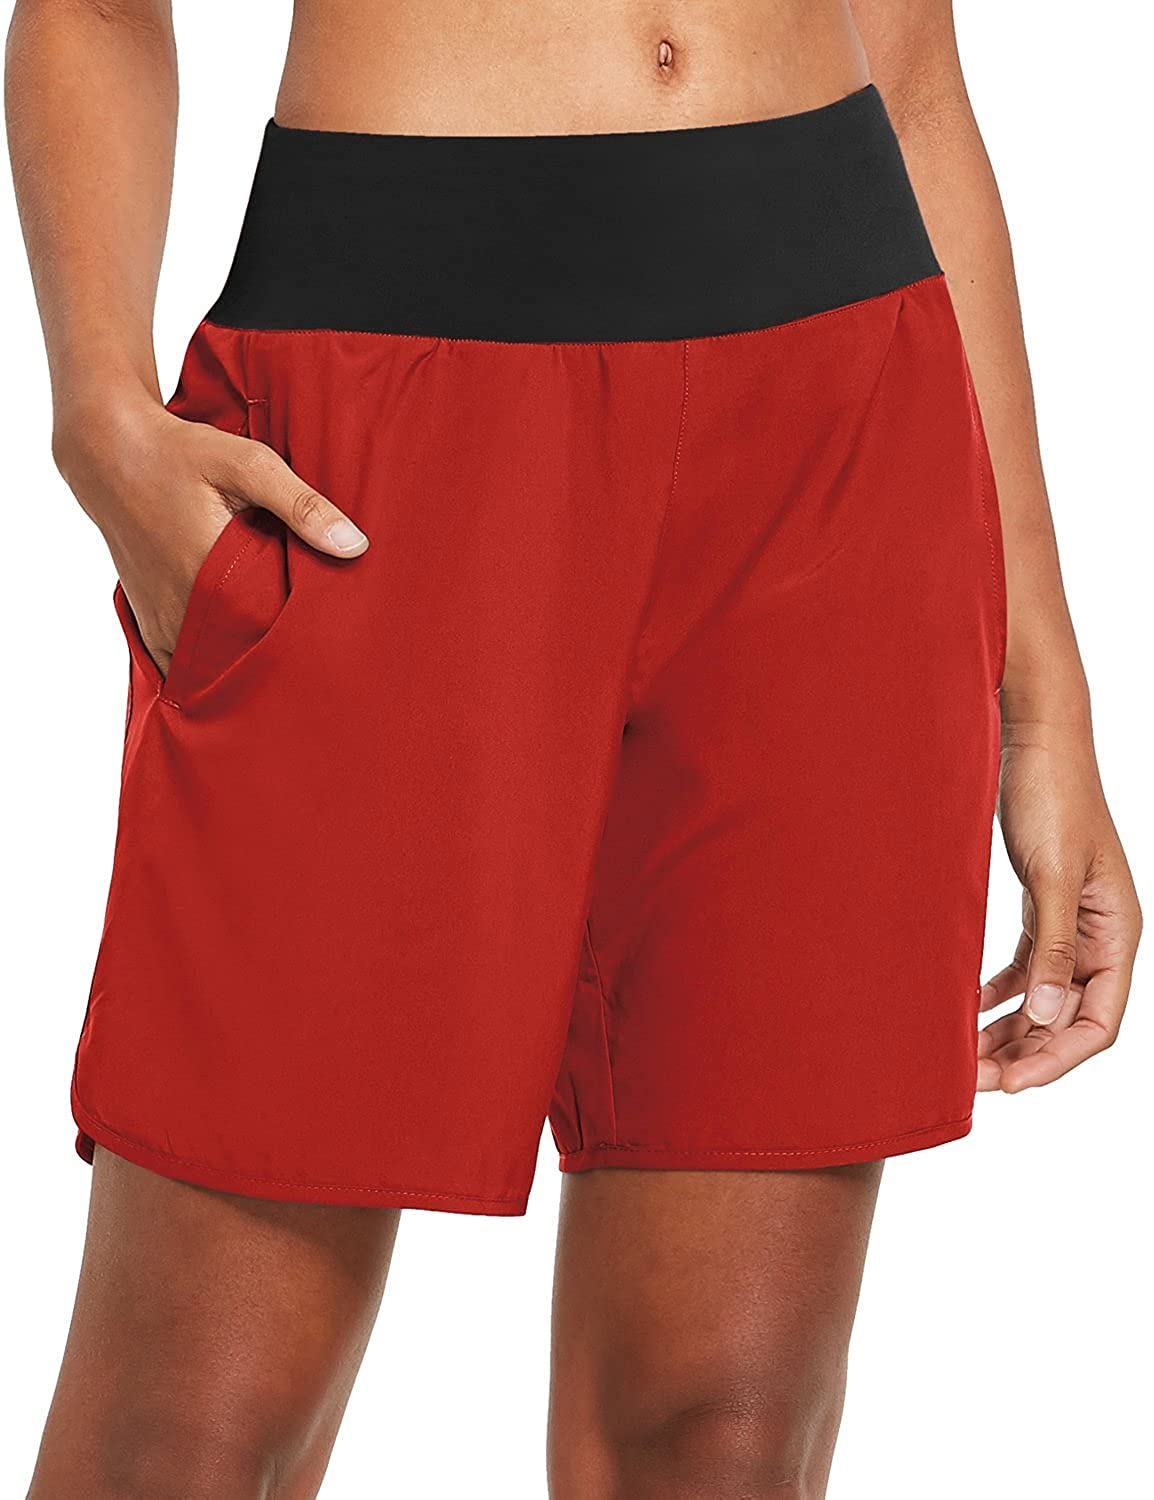 BALEAF Women's 7 Inches Long Running Shorts with Liner Lounge